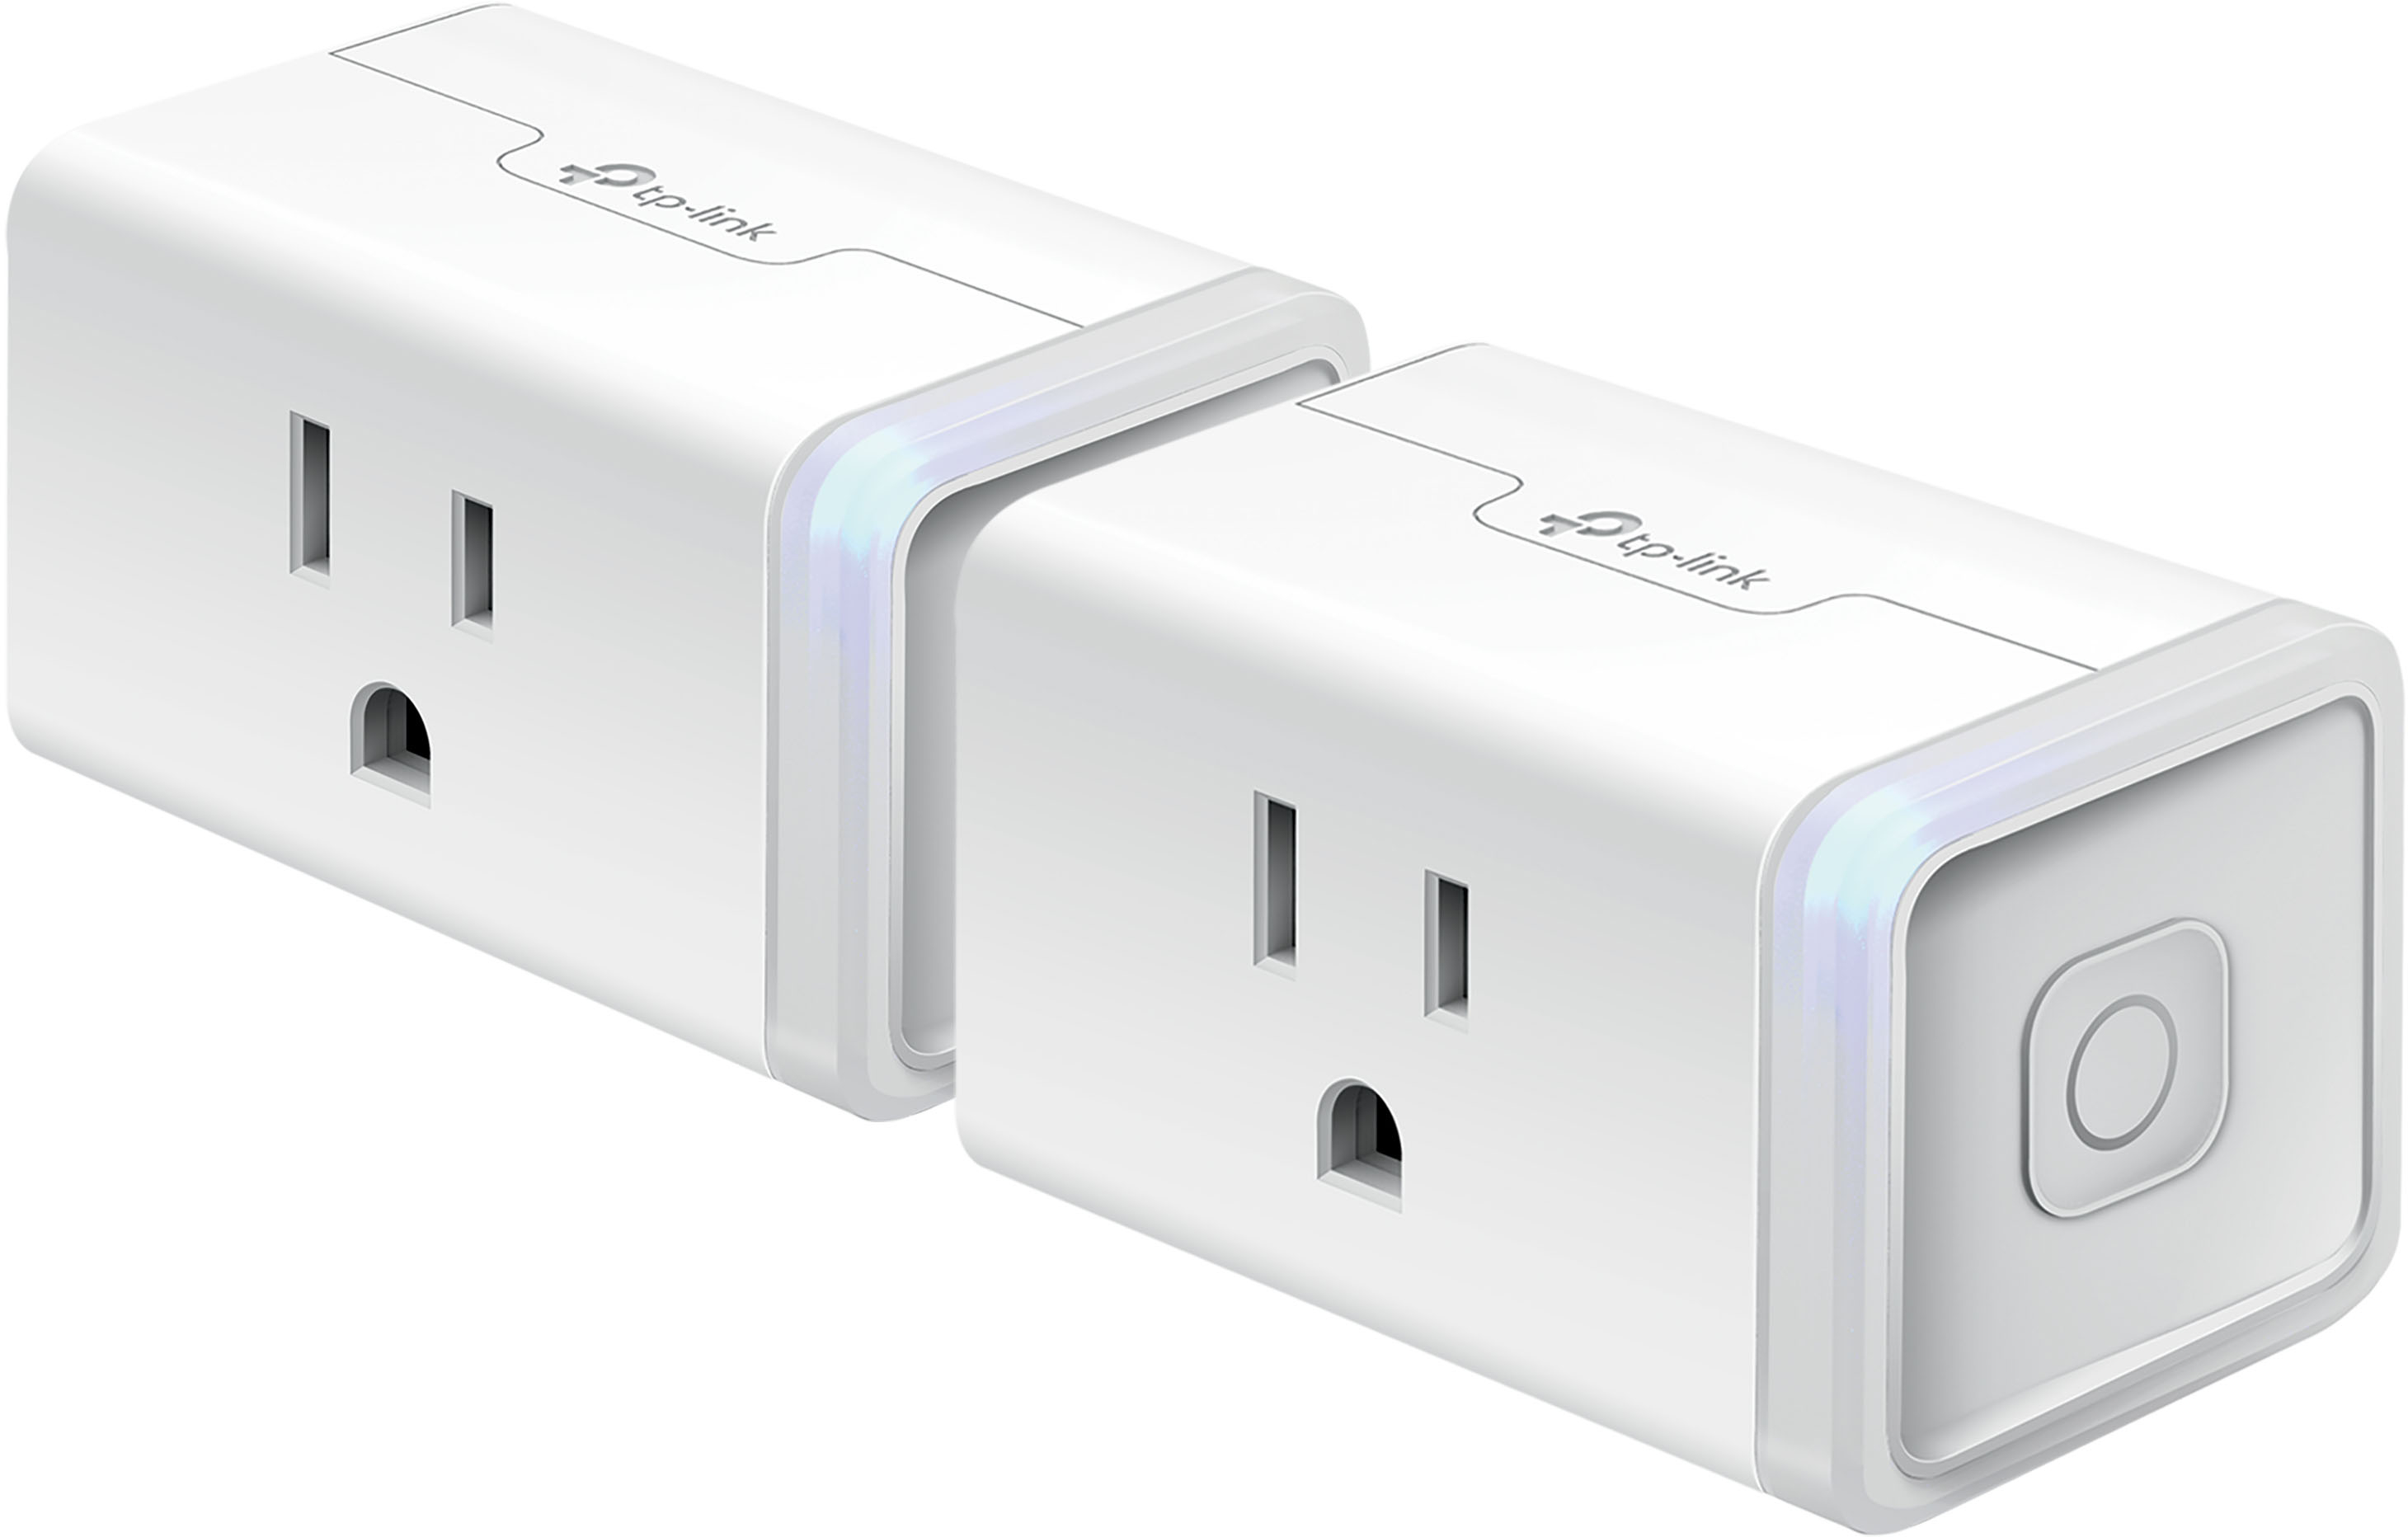 Kasa Outdoor Smart Plug 2 Pack, Smart Home Wi-Fi Outlet with 2